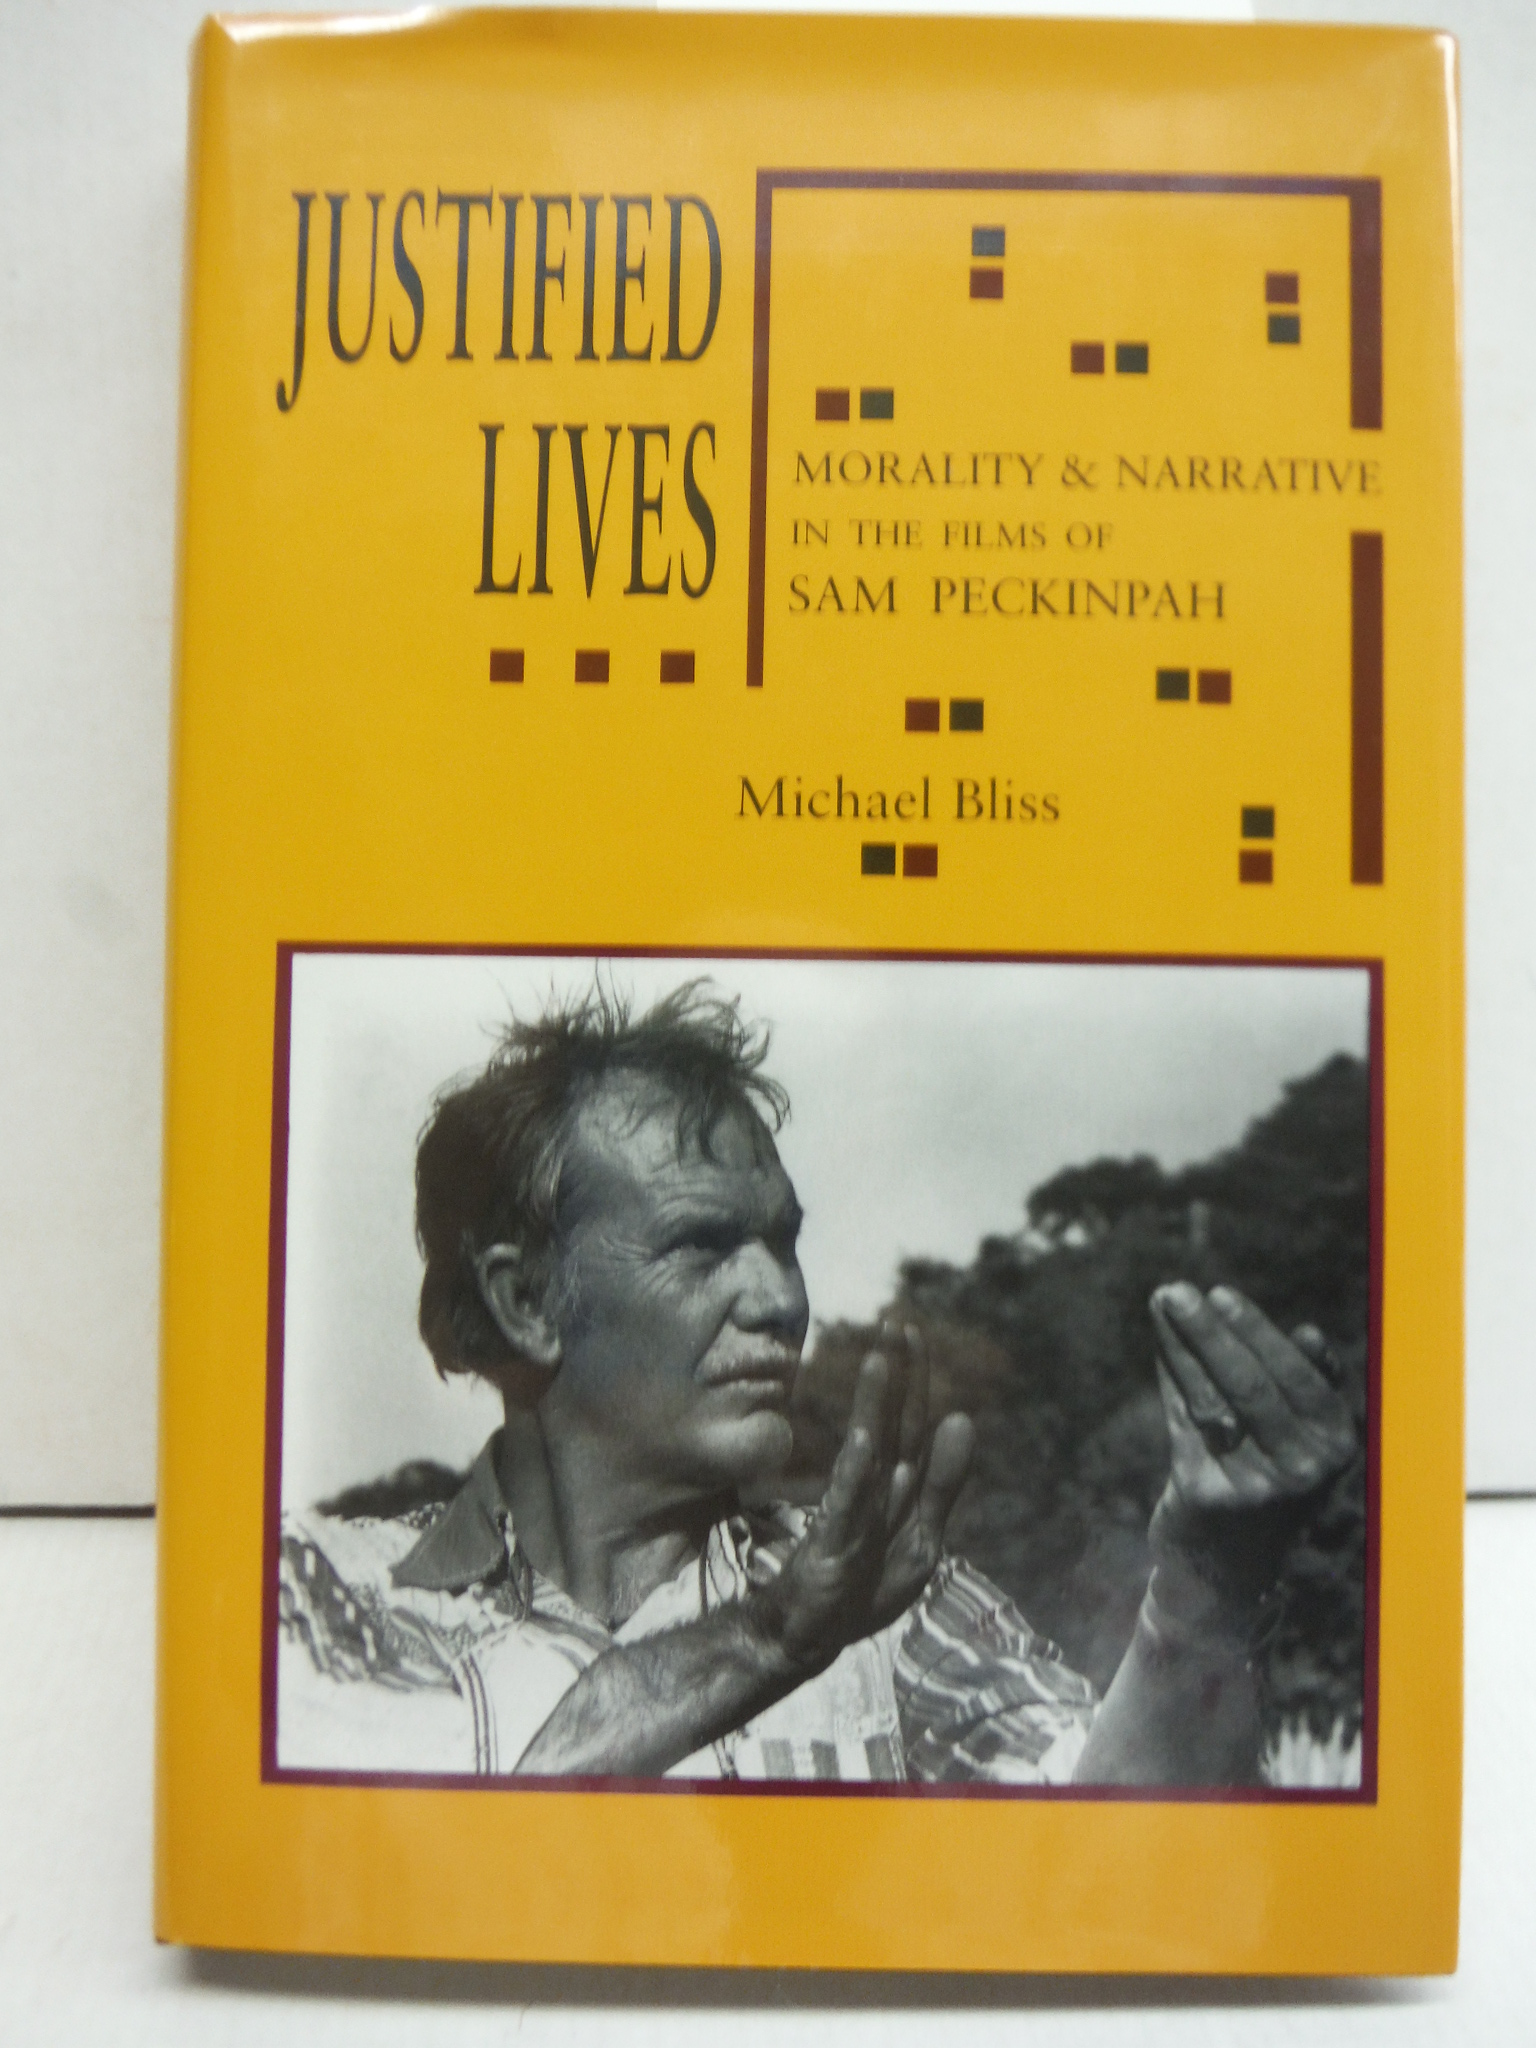 Justified Lives: Morality and Narrative in the Films of Sam Peckinpah